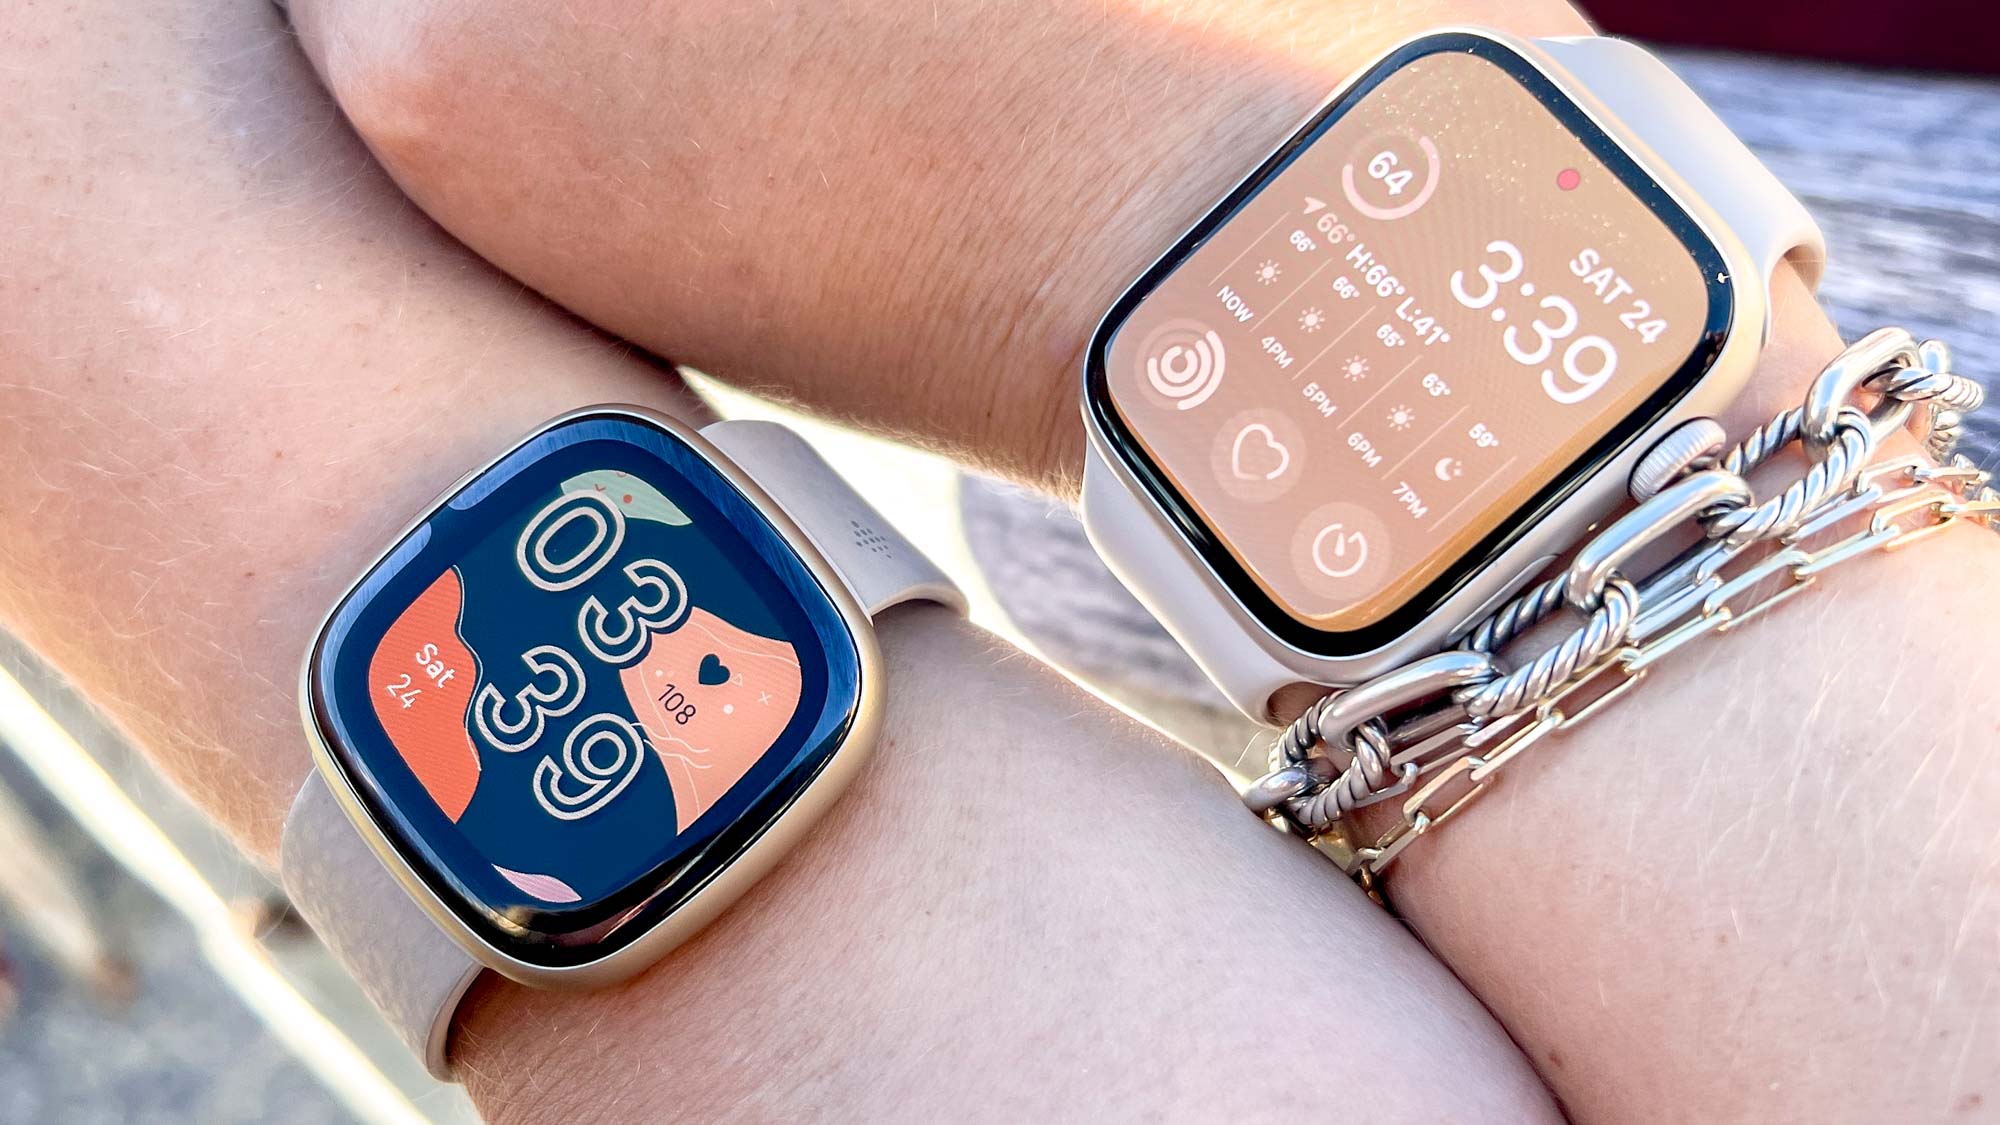 How to switch from Fitbit to Apple Watch